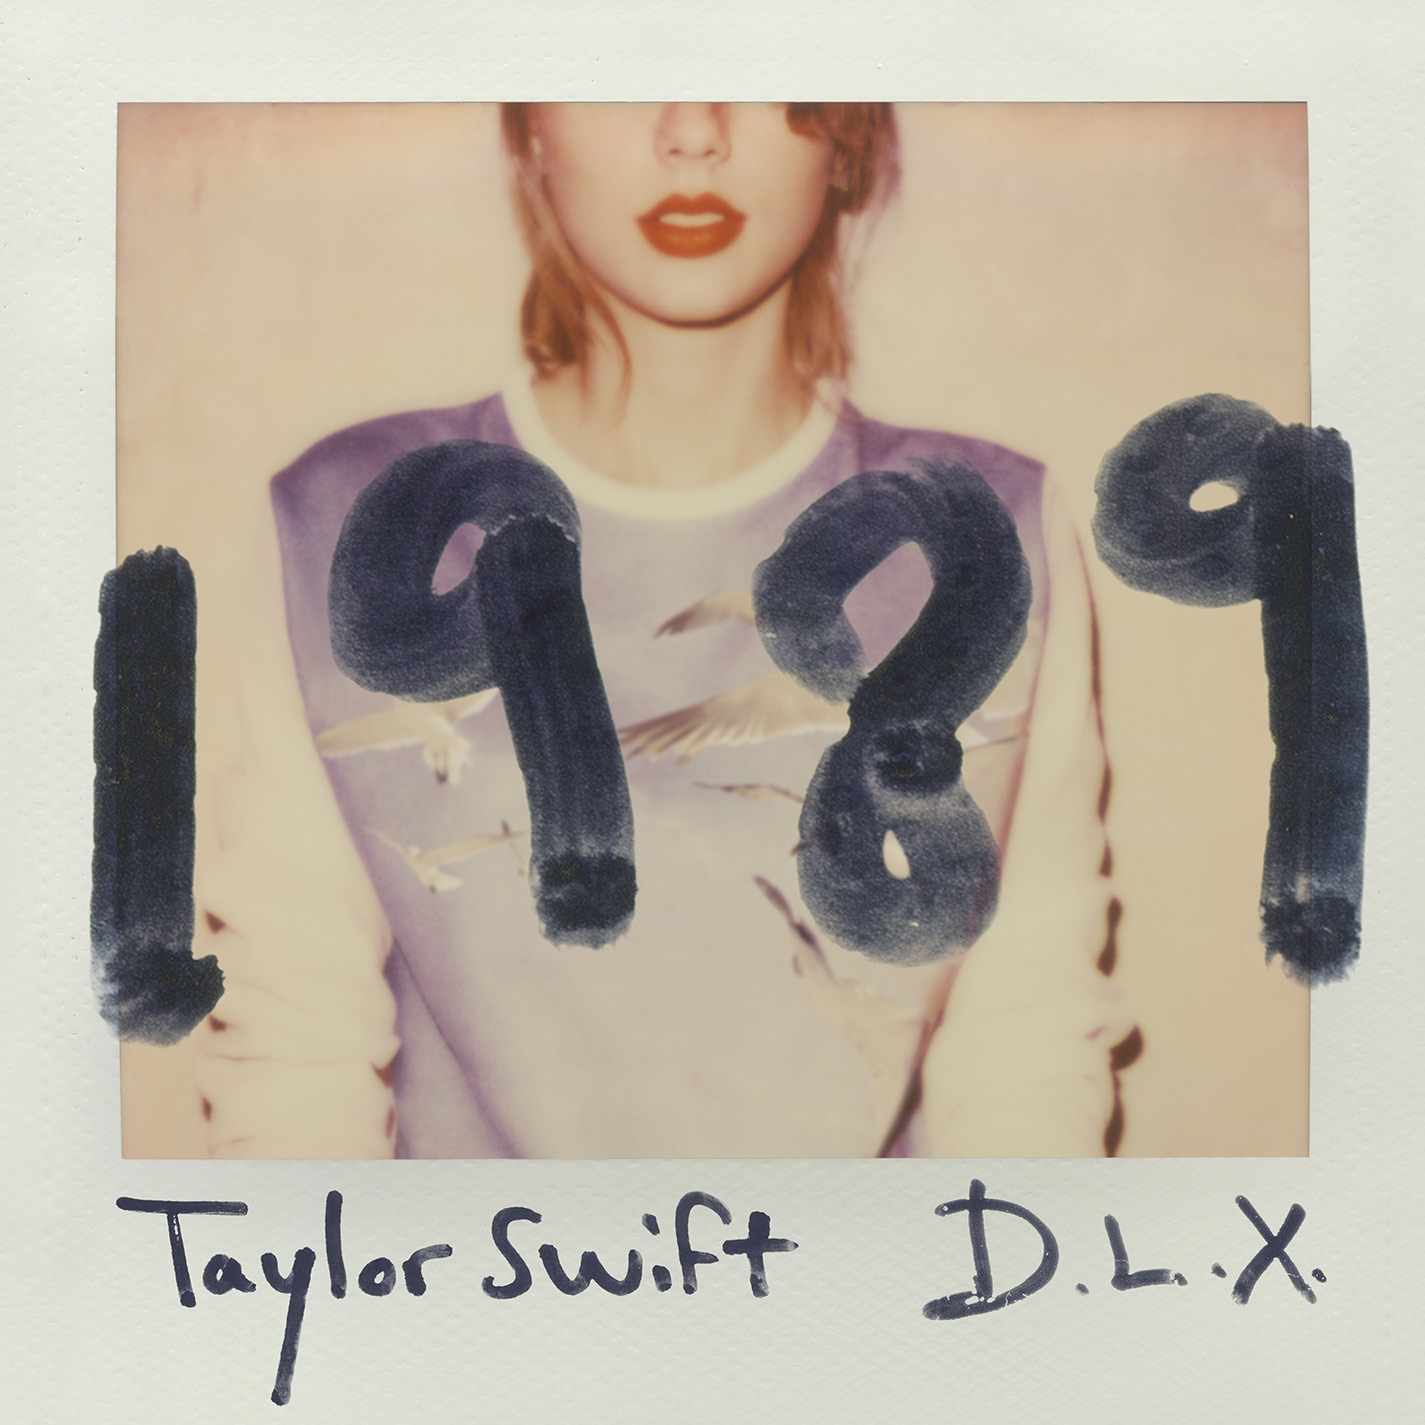 Inside by the Music: Inside the Album: 1989 / Taylor Swift